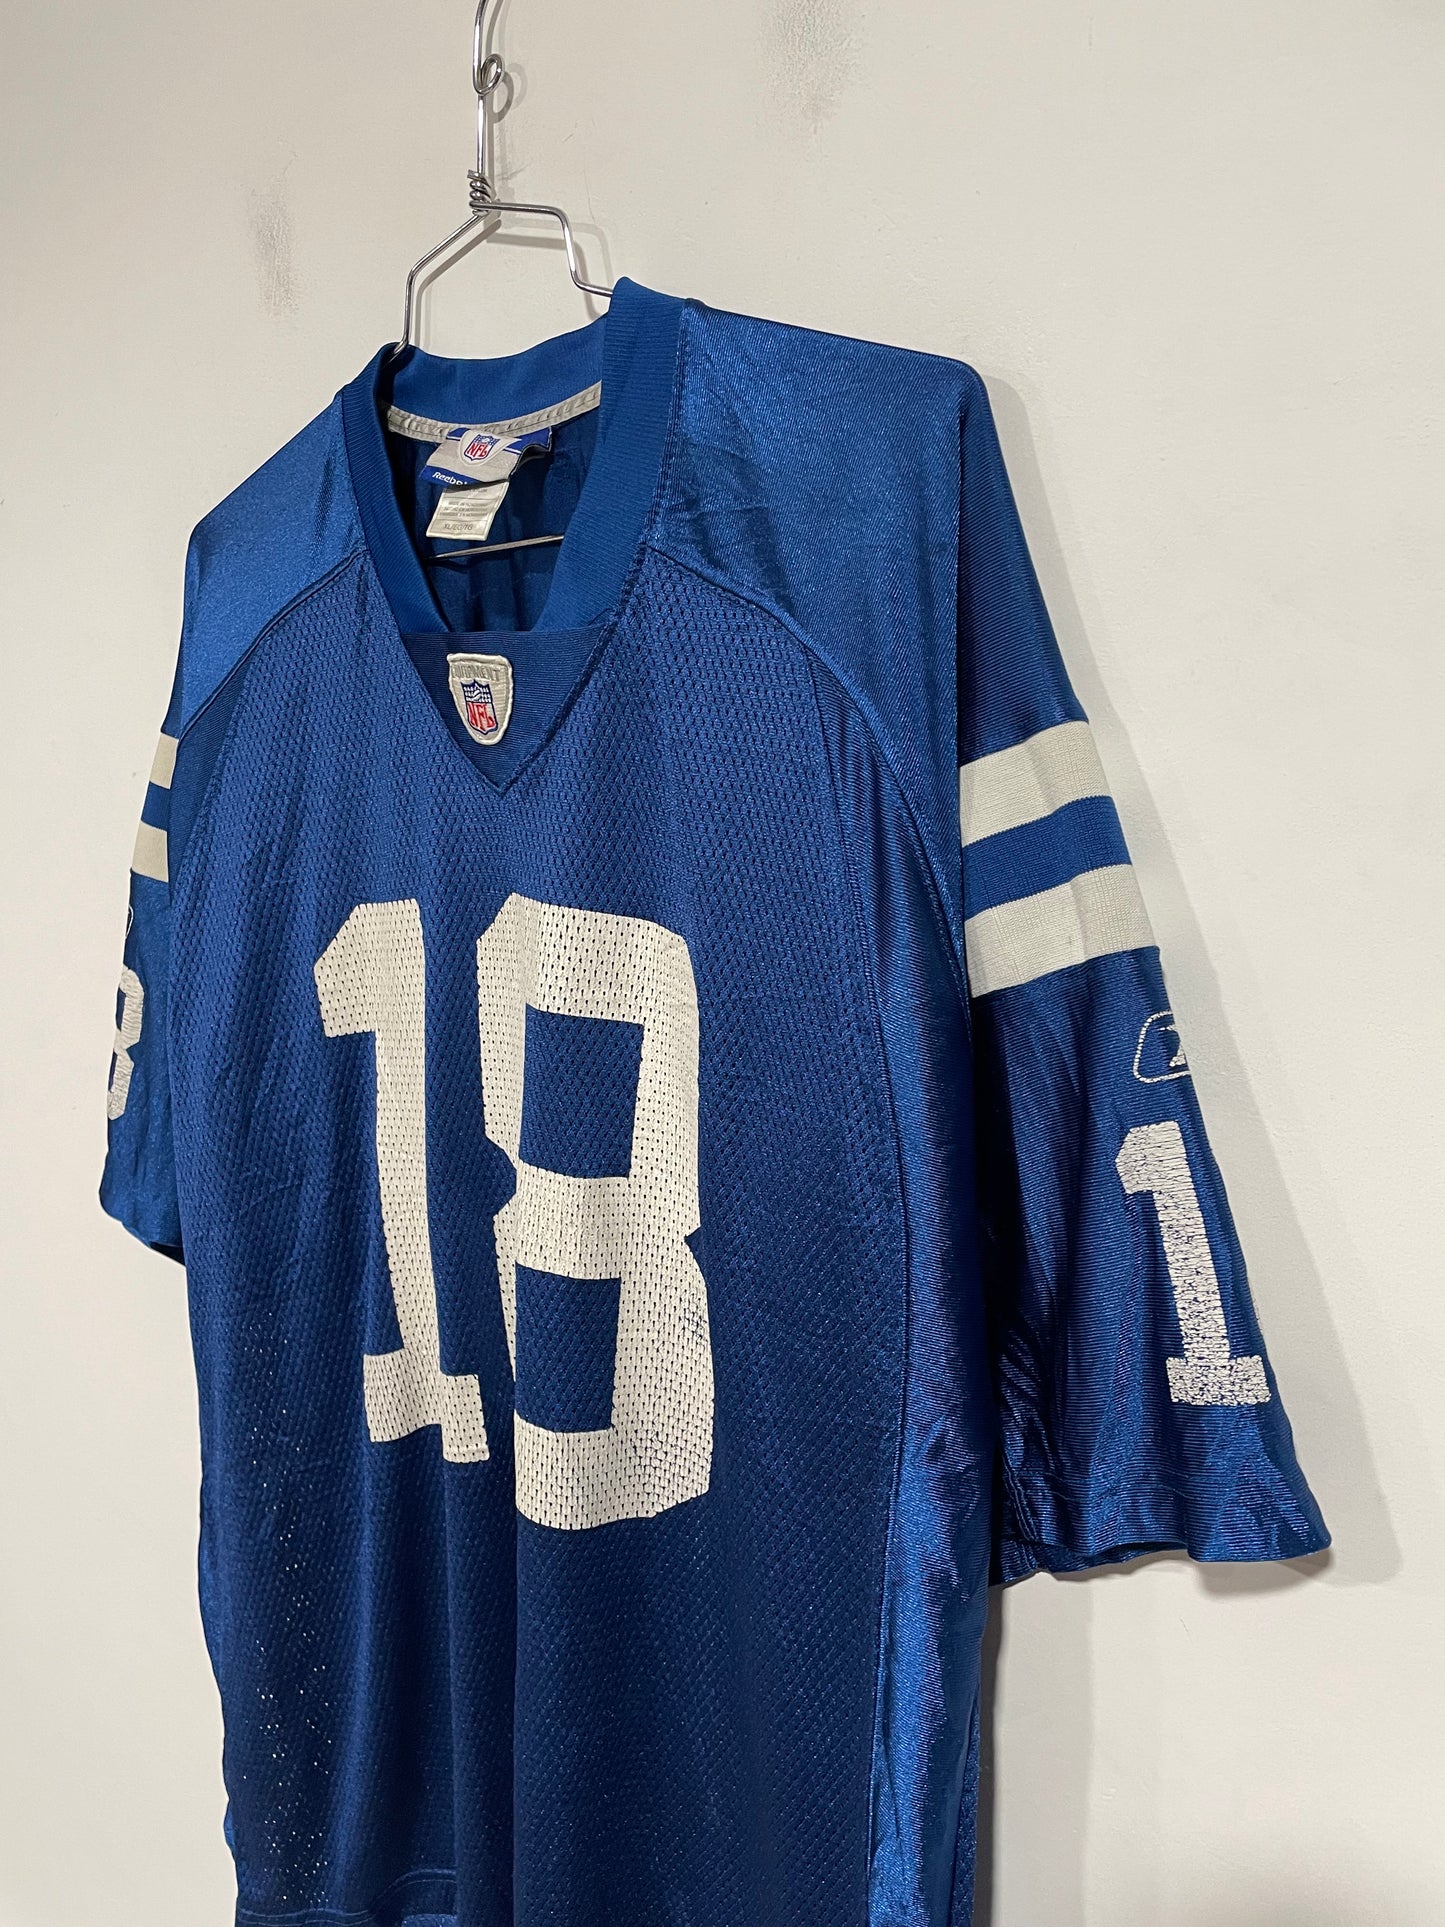 Jersey football NFL Indianapolis Colts di Manning (D774)